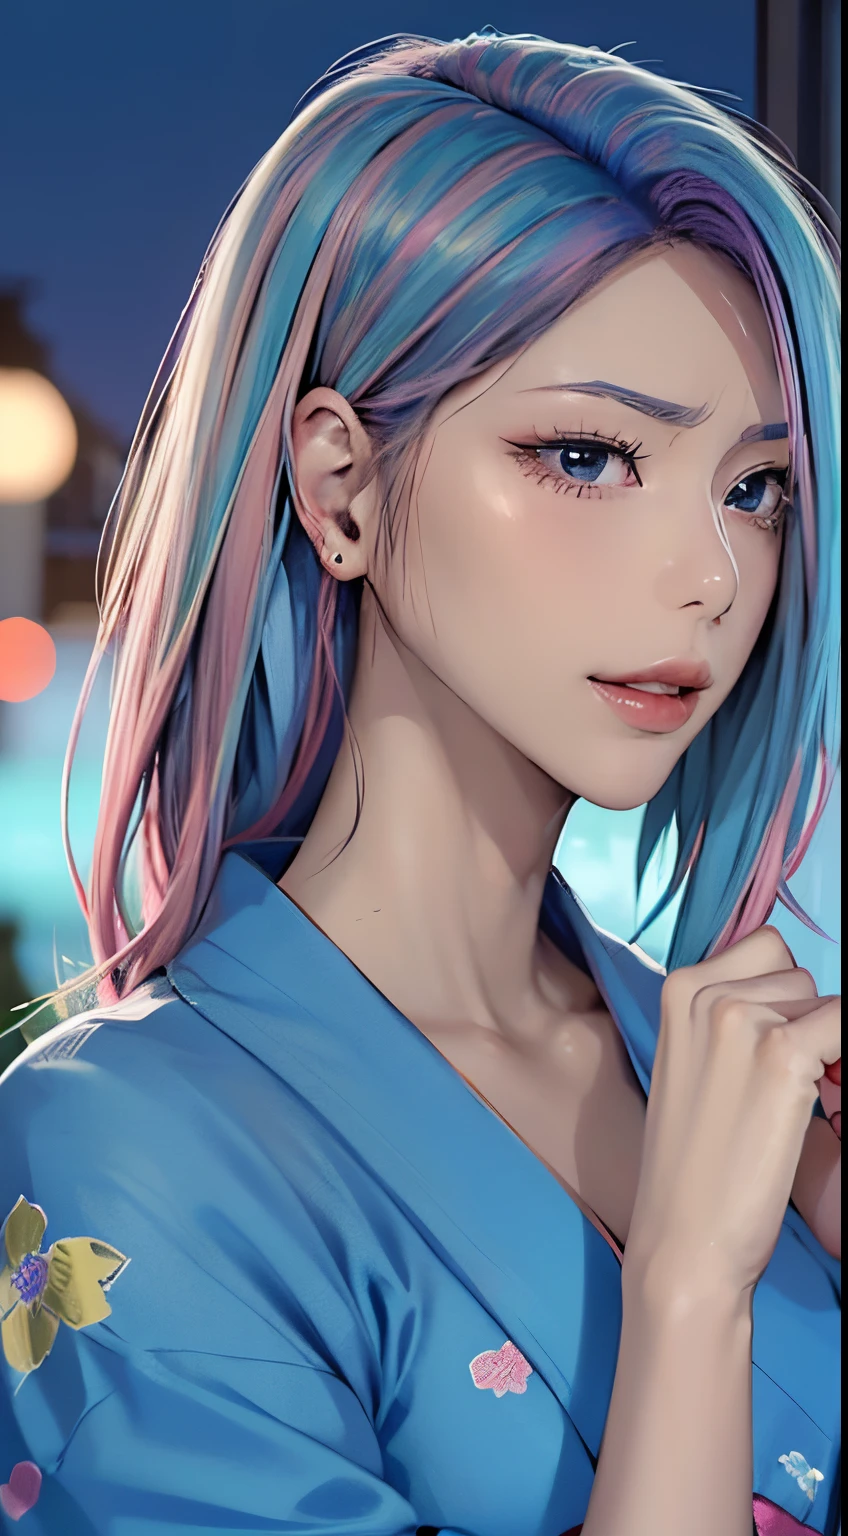 (masutepiece), (((Highest Quality)), (super detailed), 1 girl, (Iridescent hair, Colorful hair, Half blue and half pink hair: 1.2), 17 years old, (Yukata: 1.2), Midsummer Night、plein air, Bangs, Smile, sky-blue eyes, Perfect hands, Perfect hands, Hand Details, Corrected Fingers. earrings, Night Store + Background, up looking_で_viewer, Cowboy Shot, of the highest quality, rich detail, Perfect image quality, blue dark color